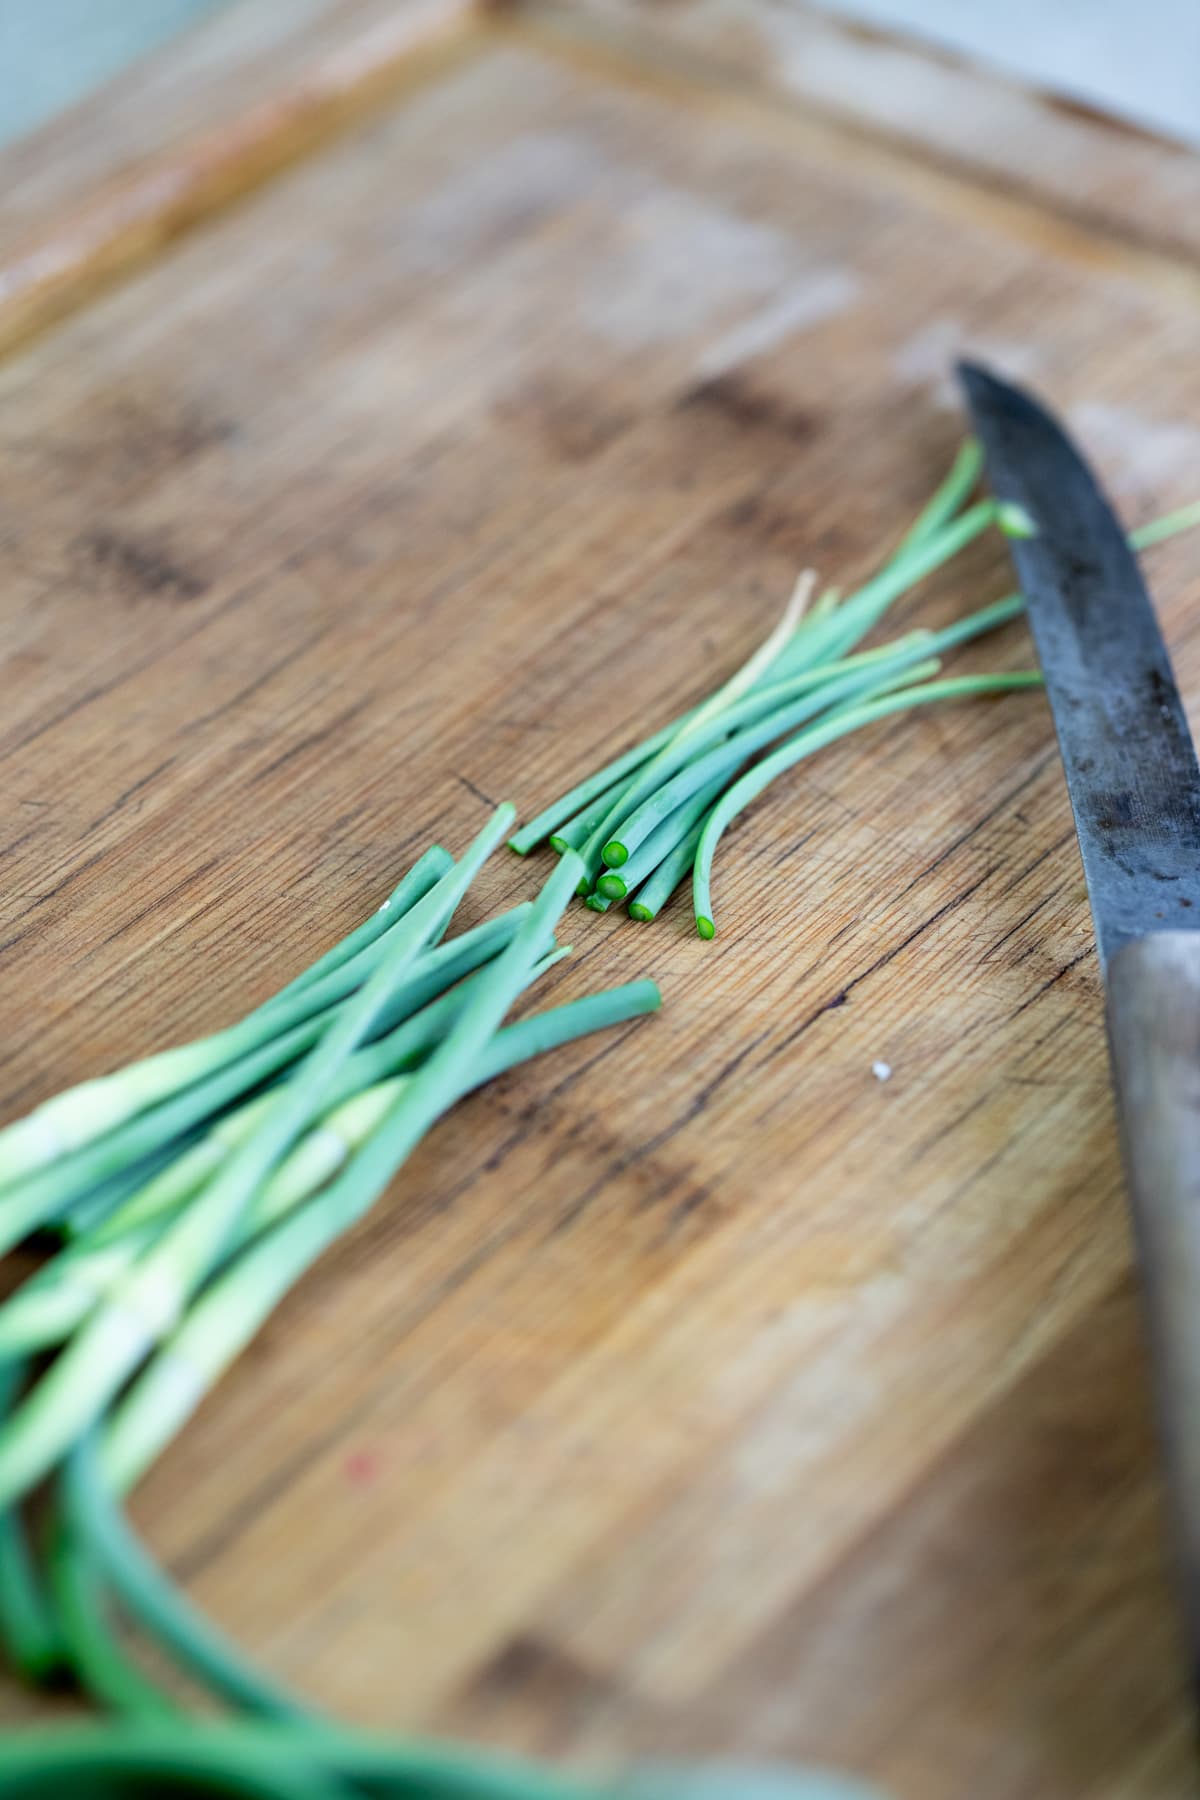 cutting the garlic scape into smaller pieces